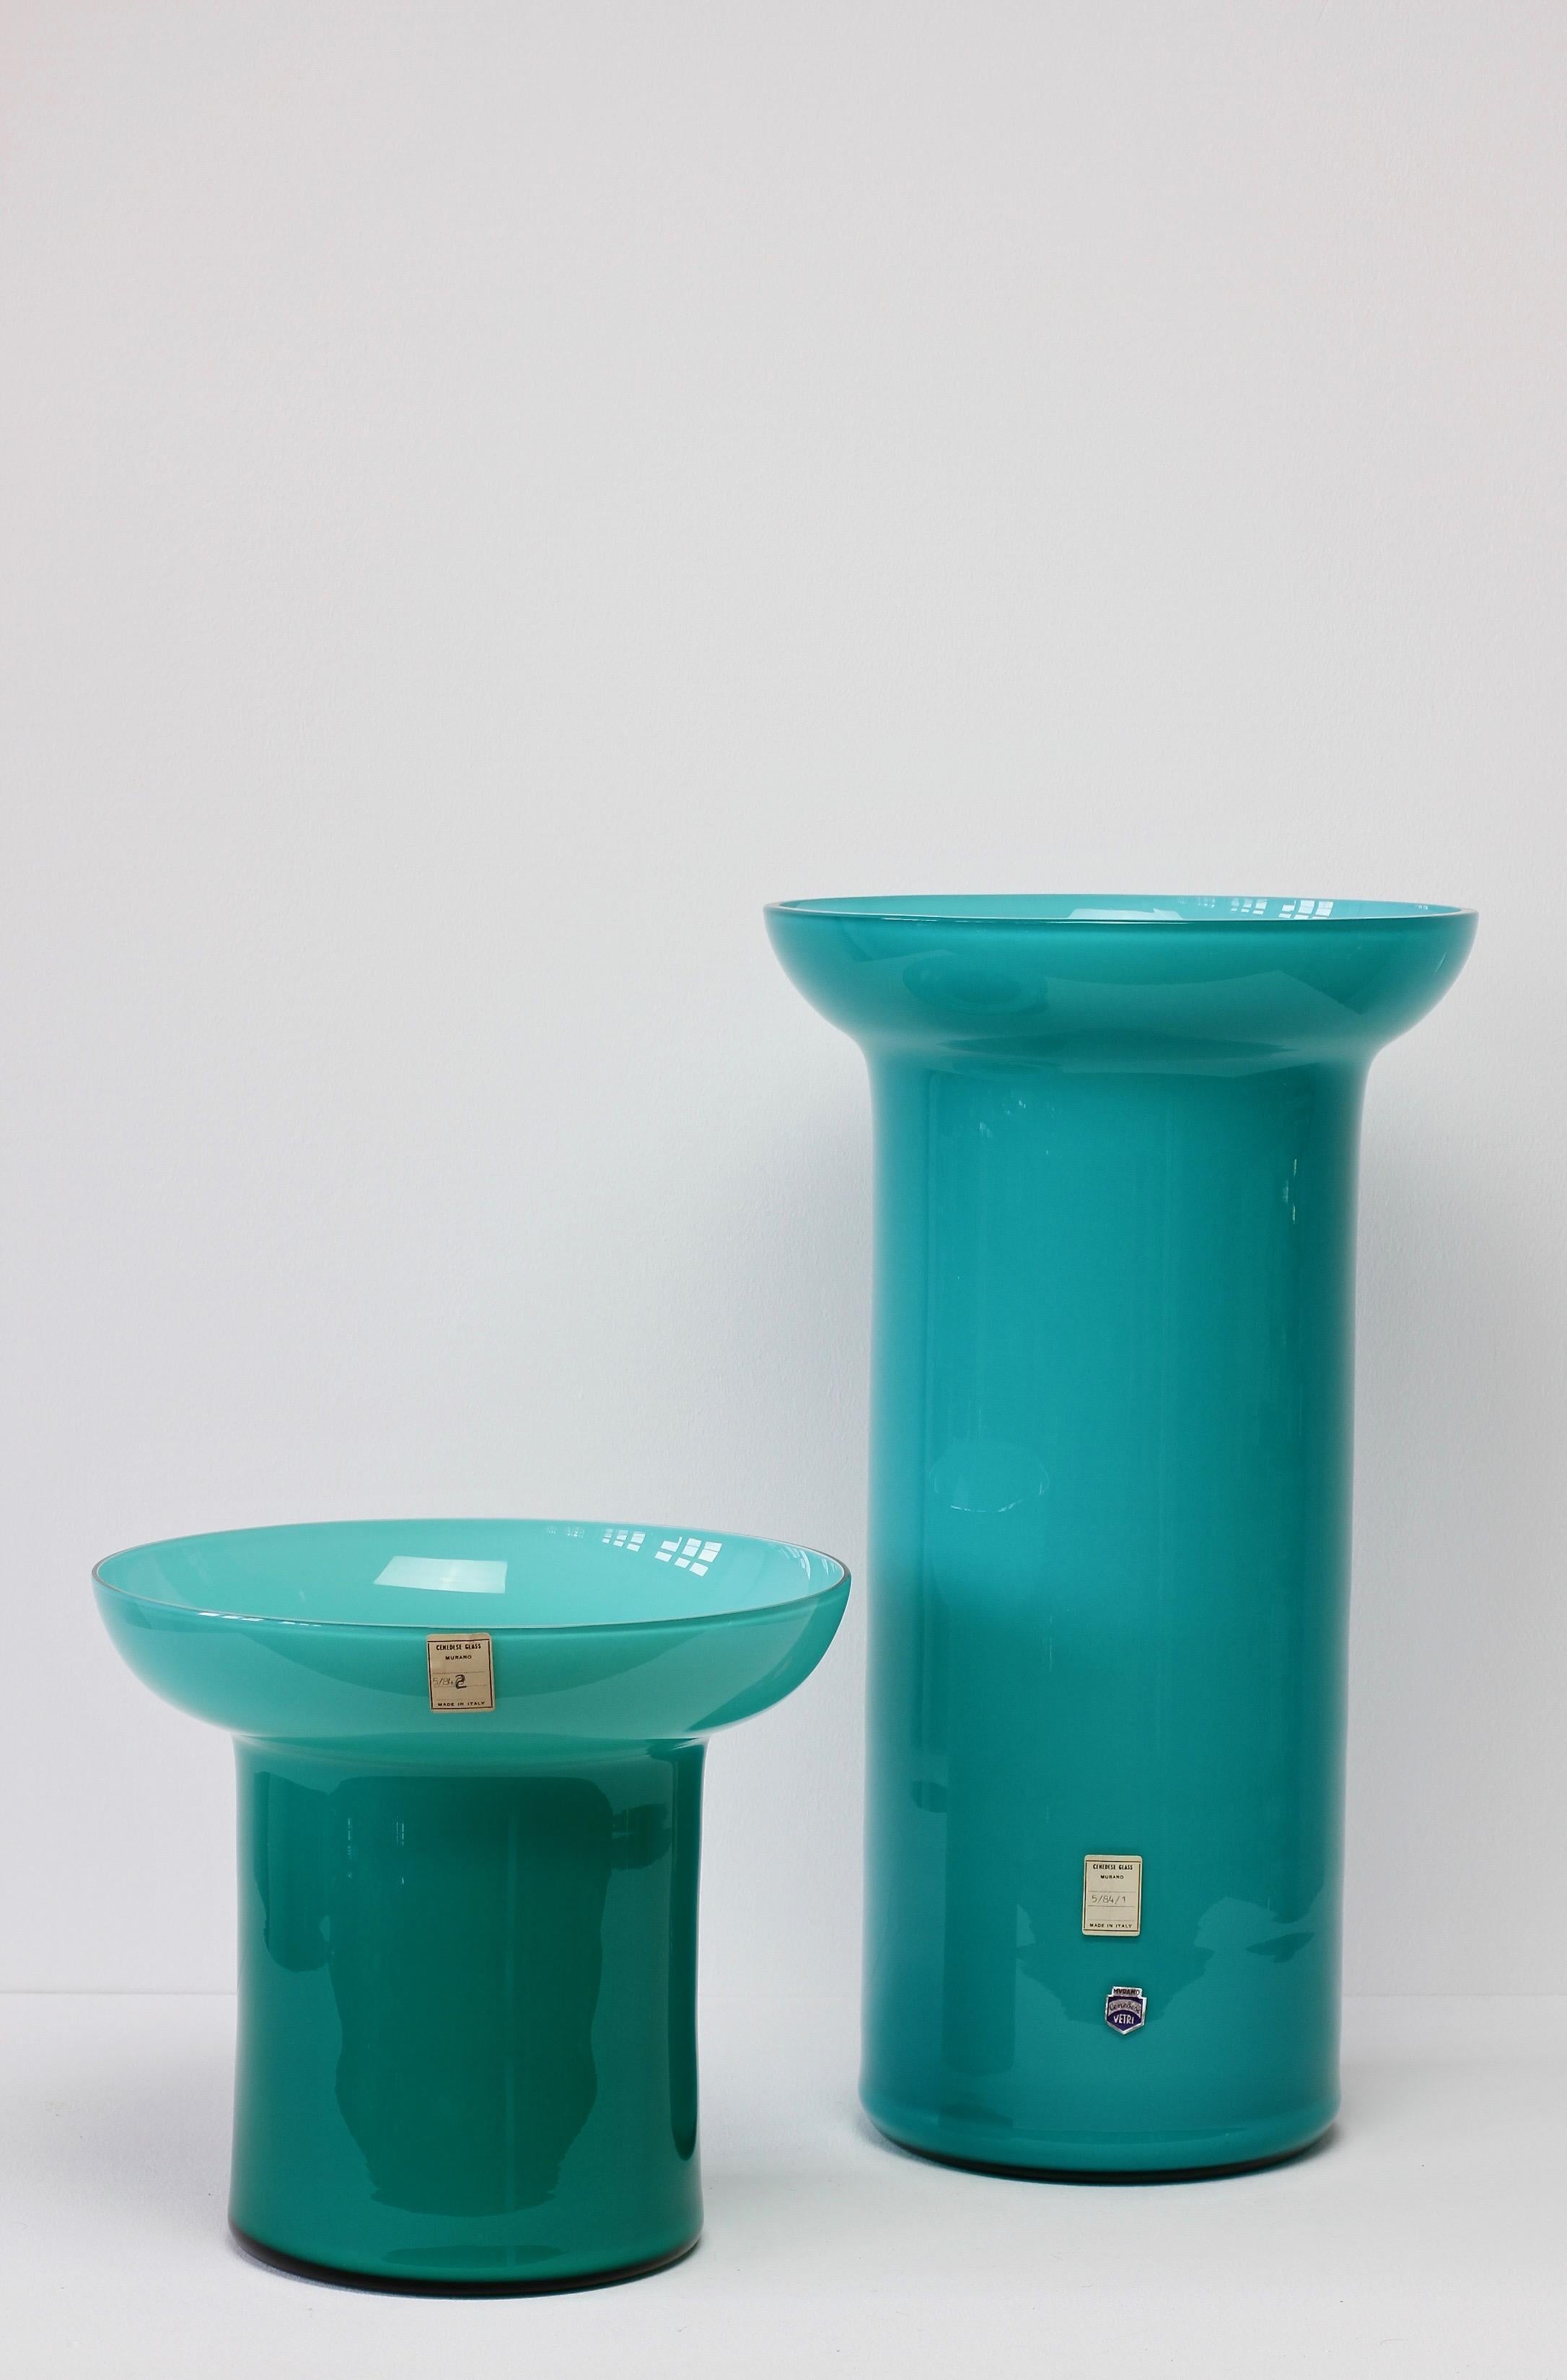 Monumental large pair of vases by Cenedese glass of Murano, Italy circa 1984. Particularly striking is the elegant form and bold, petrol blue/turquoise color/colour.

Original paper label on the taller vase reads - 5/84/1 
Original paper label on